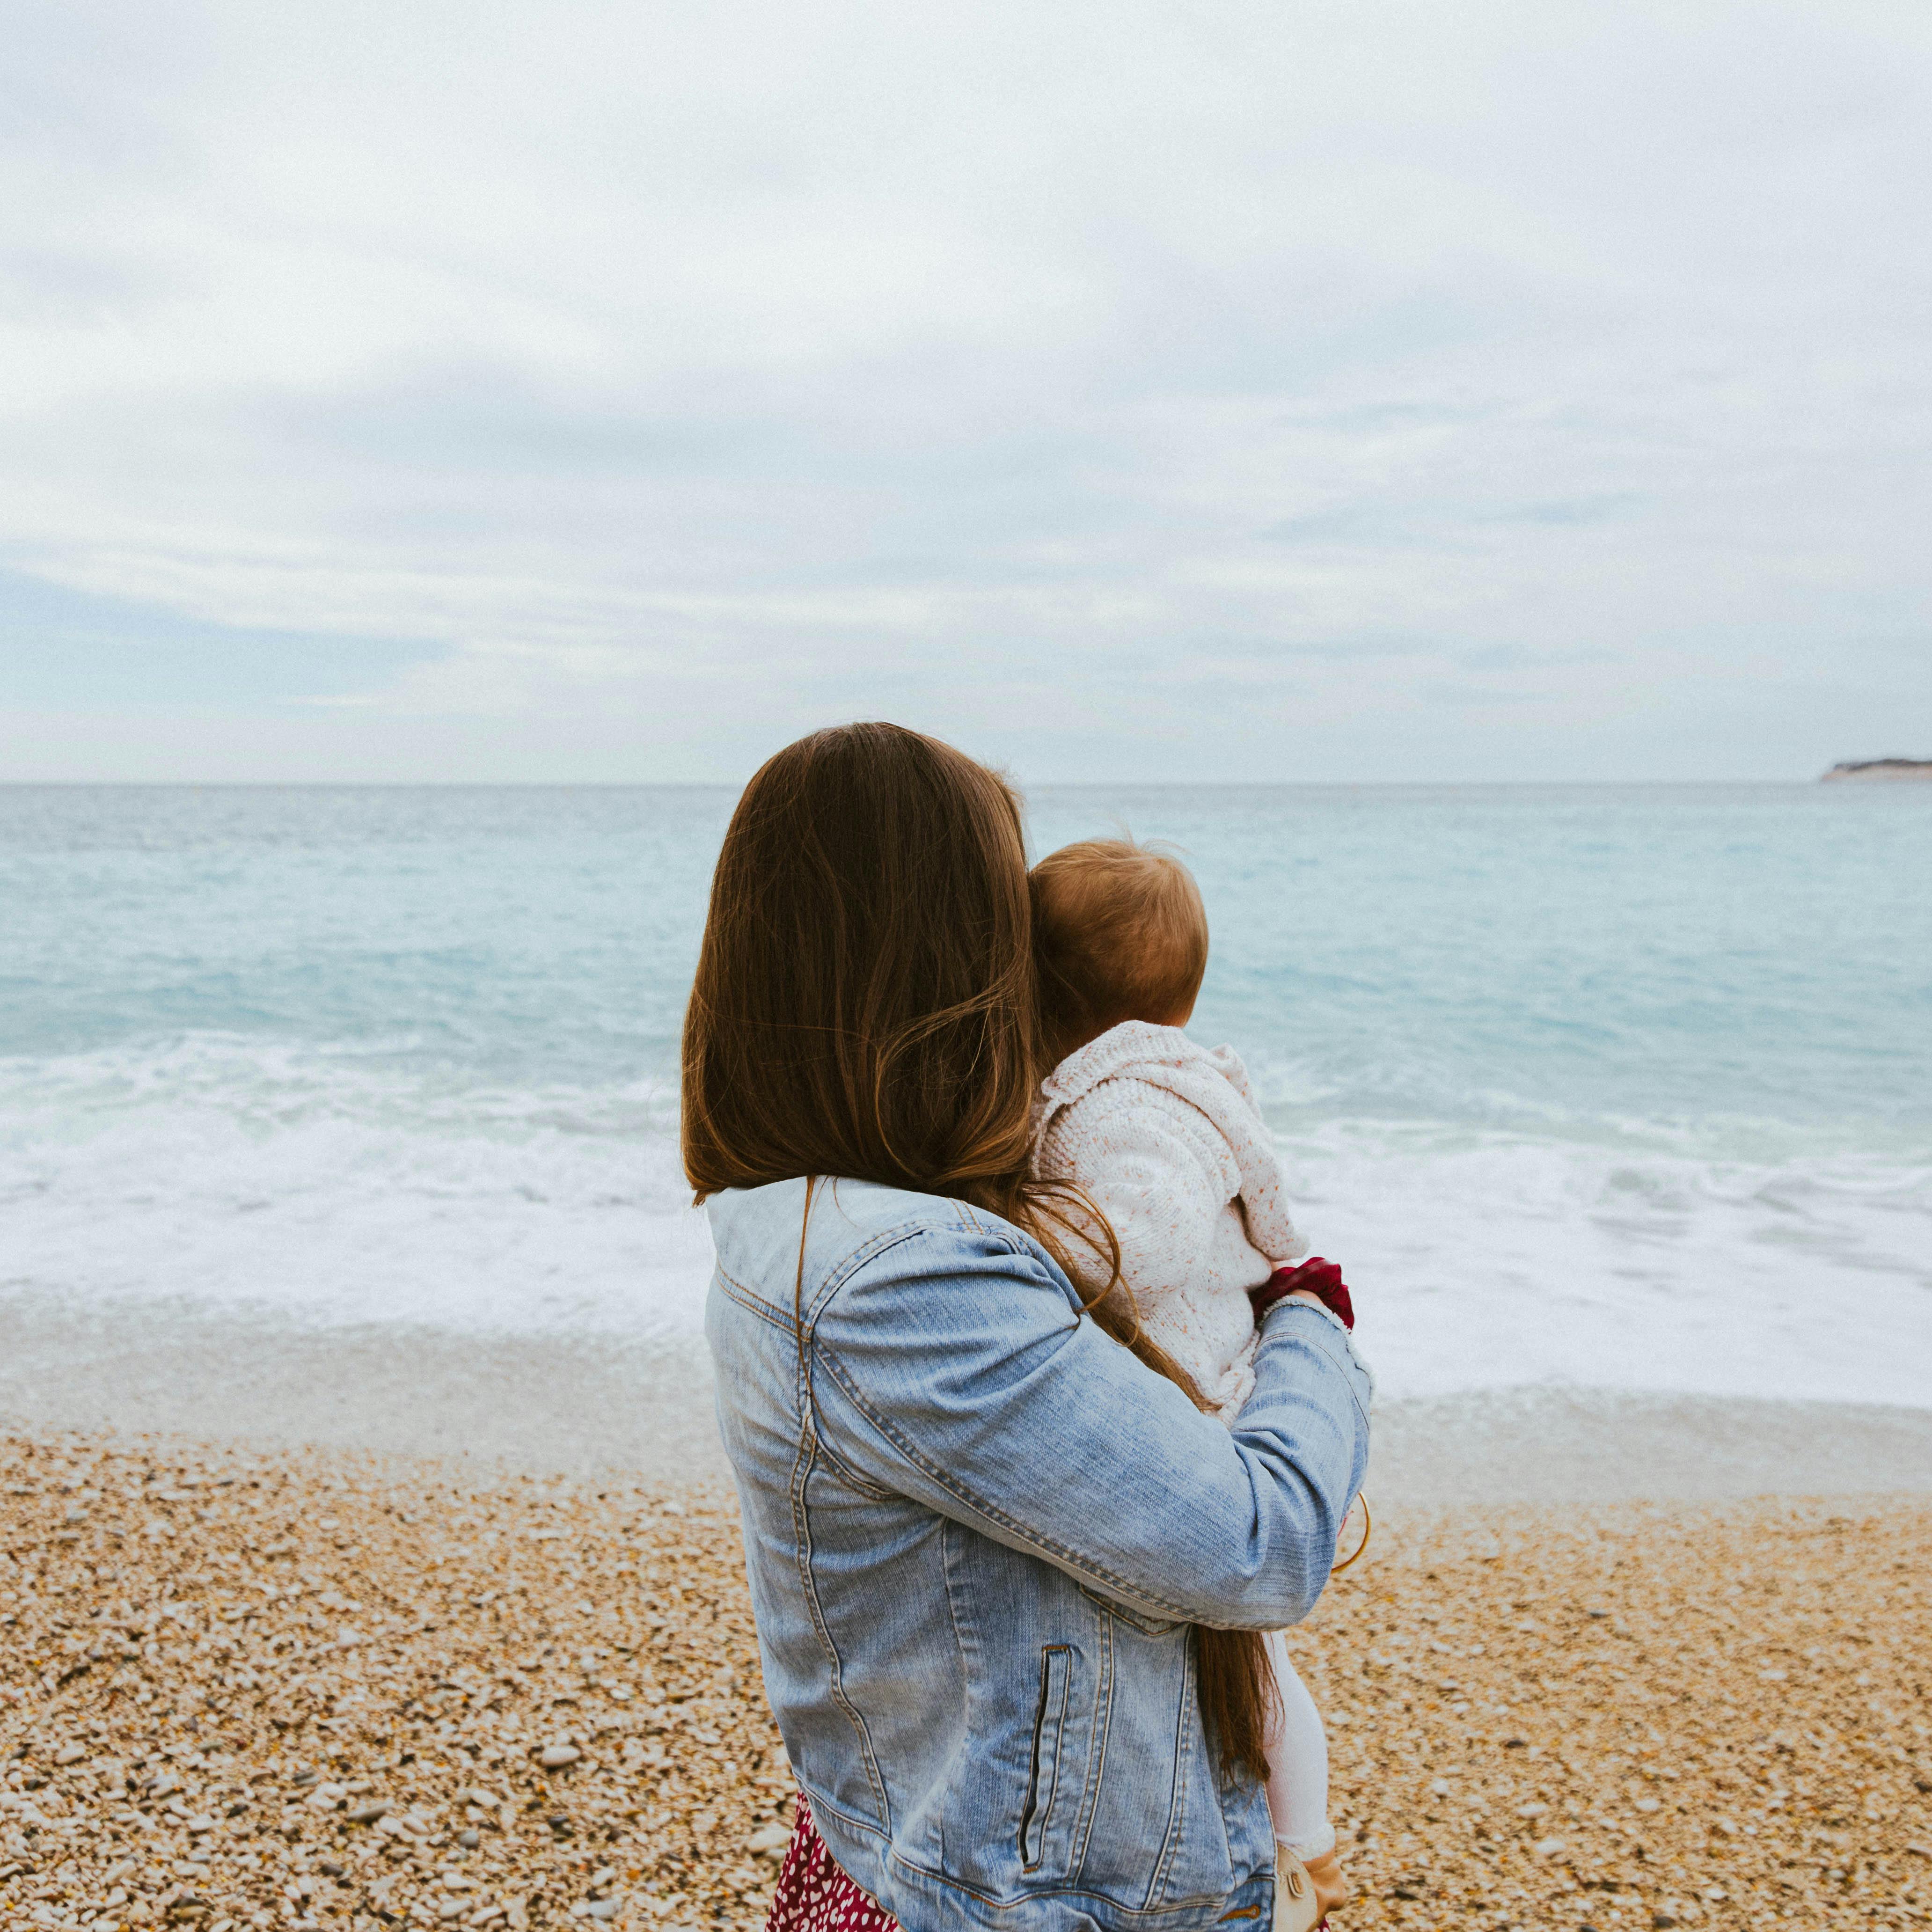 A woman holding her baby at the beach | Source: Pexels